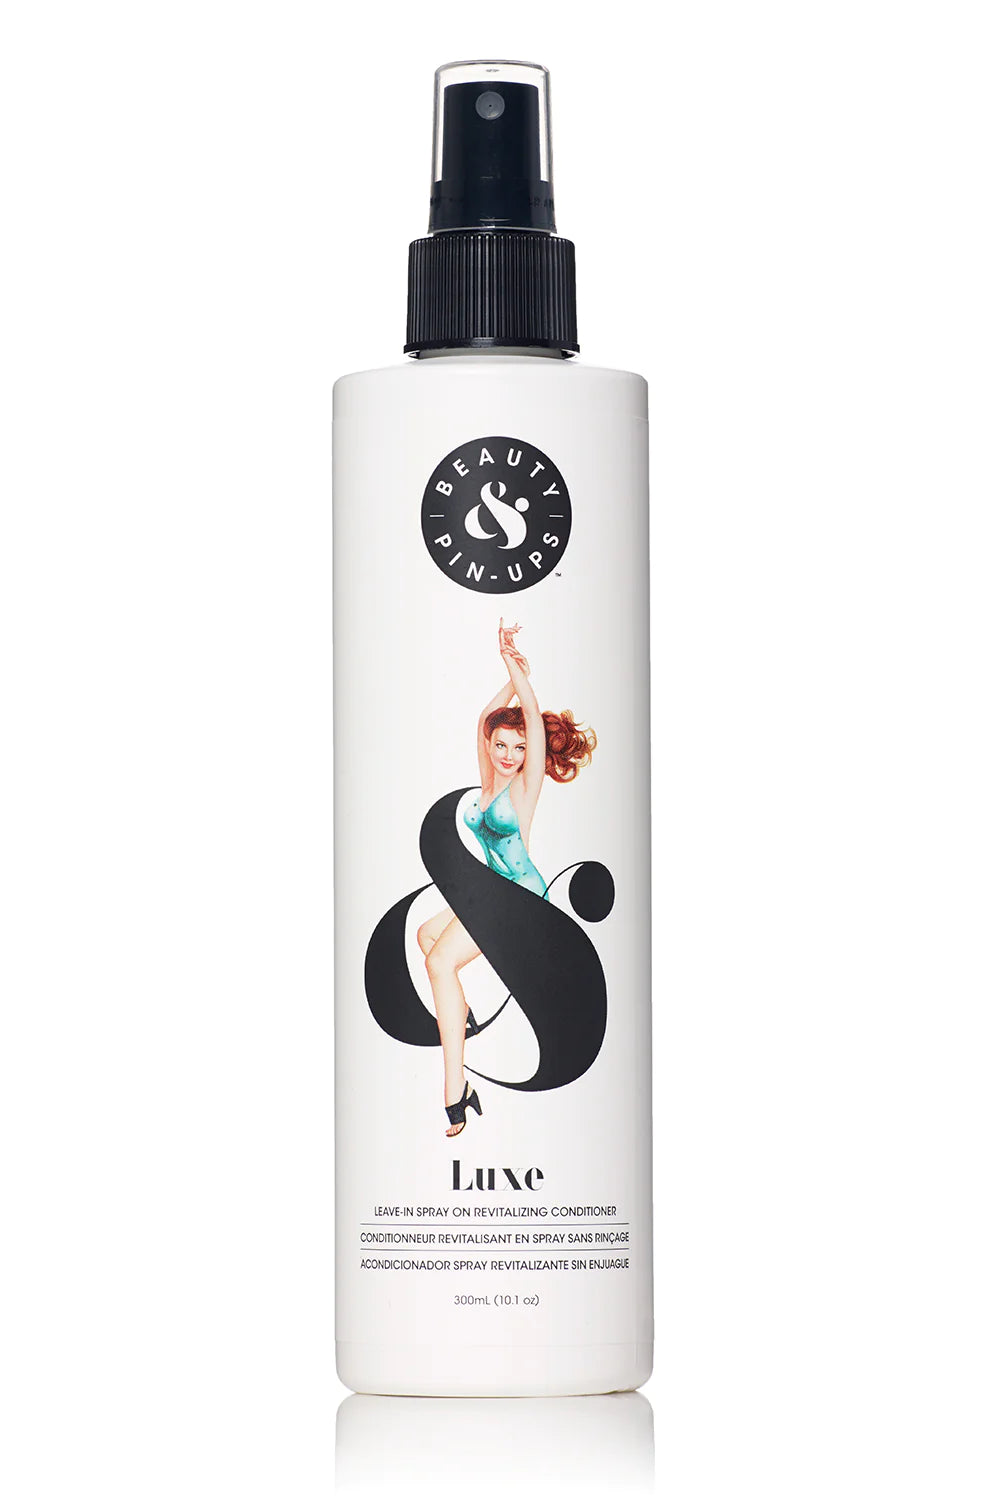 Beauty & Pin Ups Luxe Leave-In Treatment image of 10.1 oz bottle